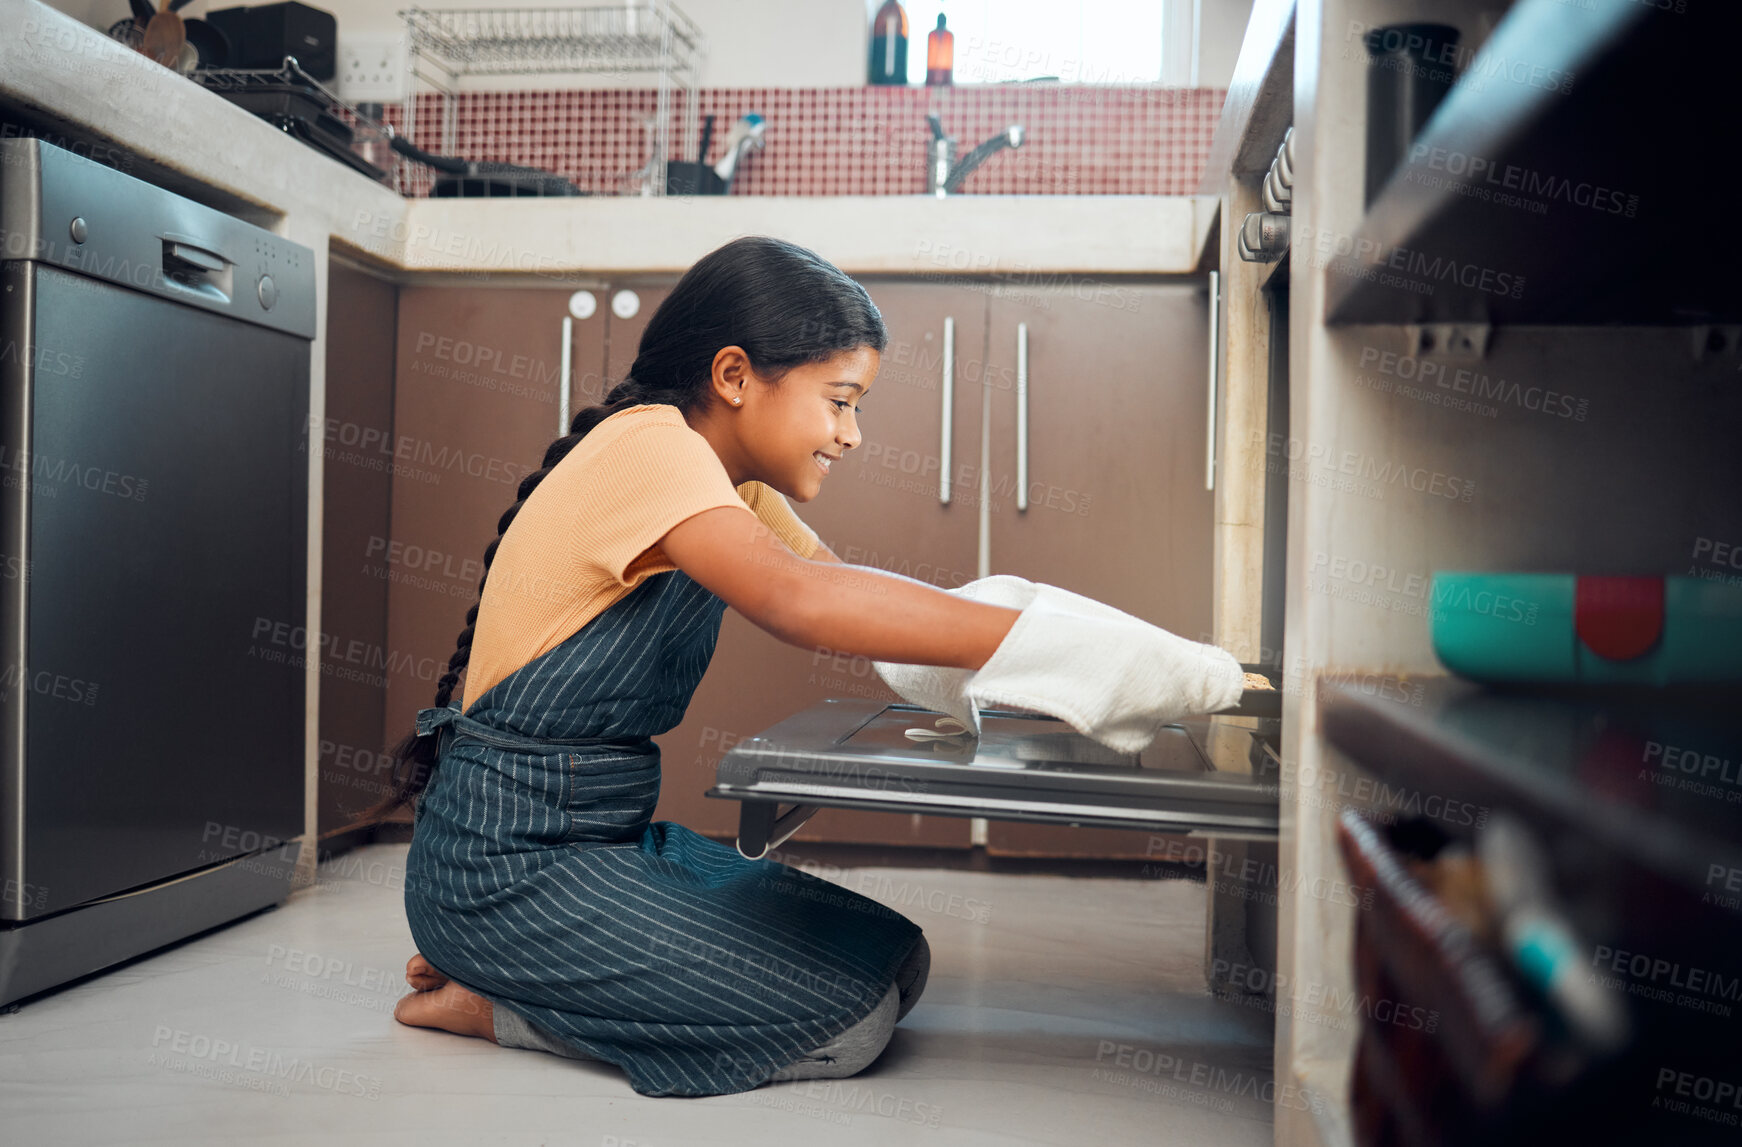 Buy stock photo Cooking, oven and girl child in kitchen holding tray after baking in home. Learning, education and happy kid teaching herself how to bake pastry, having fun and enjoying quality time alone in house.